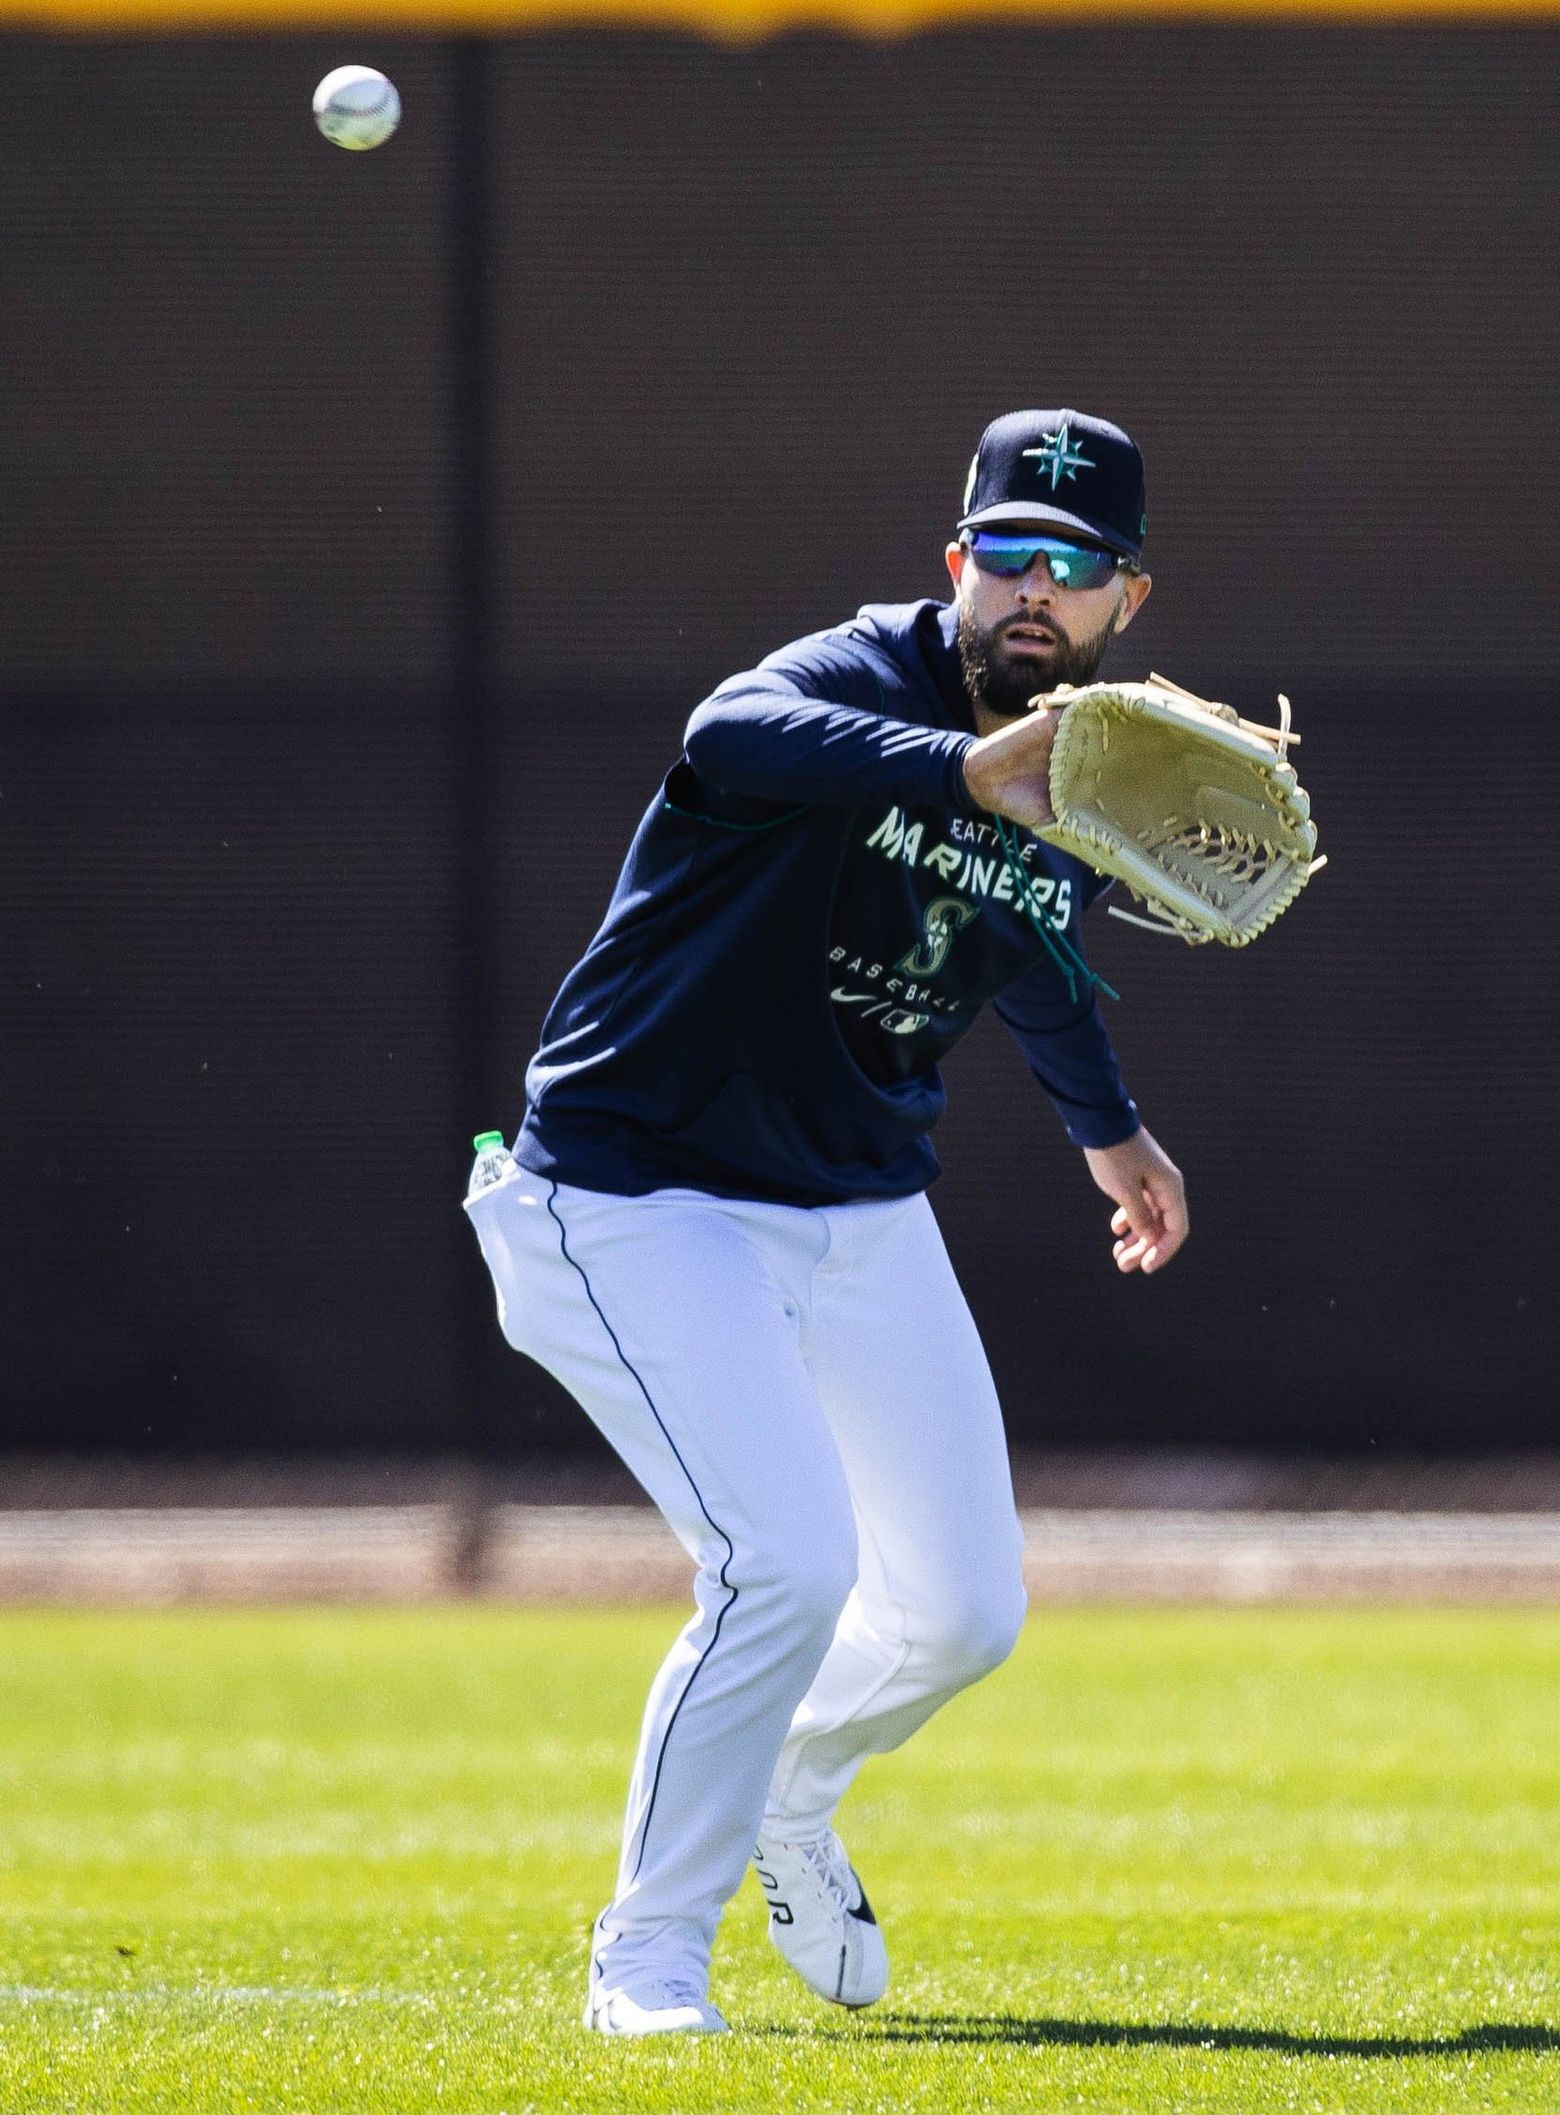 I'm a Mariner now': Outfielder Jesse Winker embraces trade to